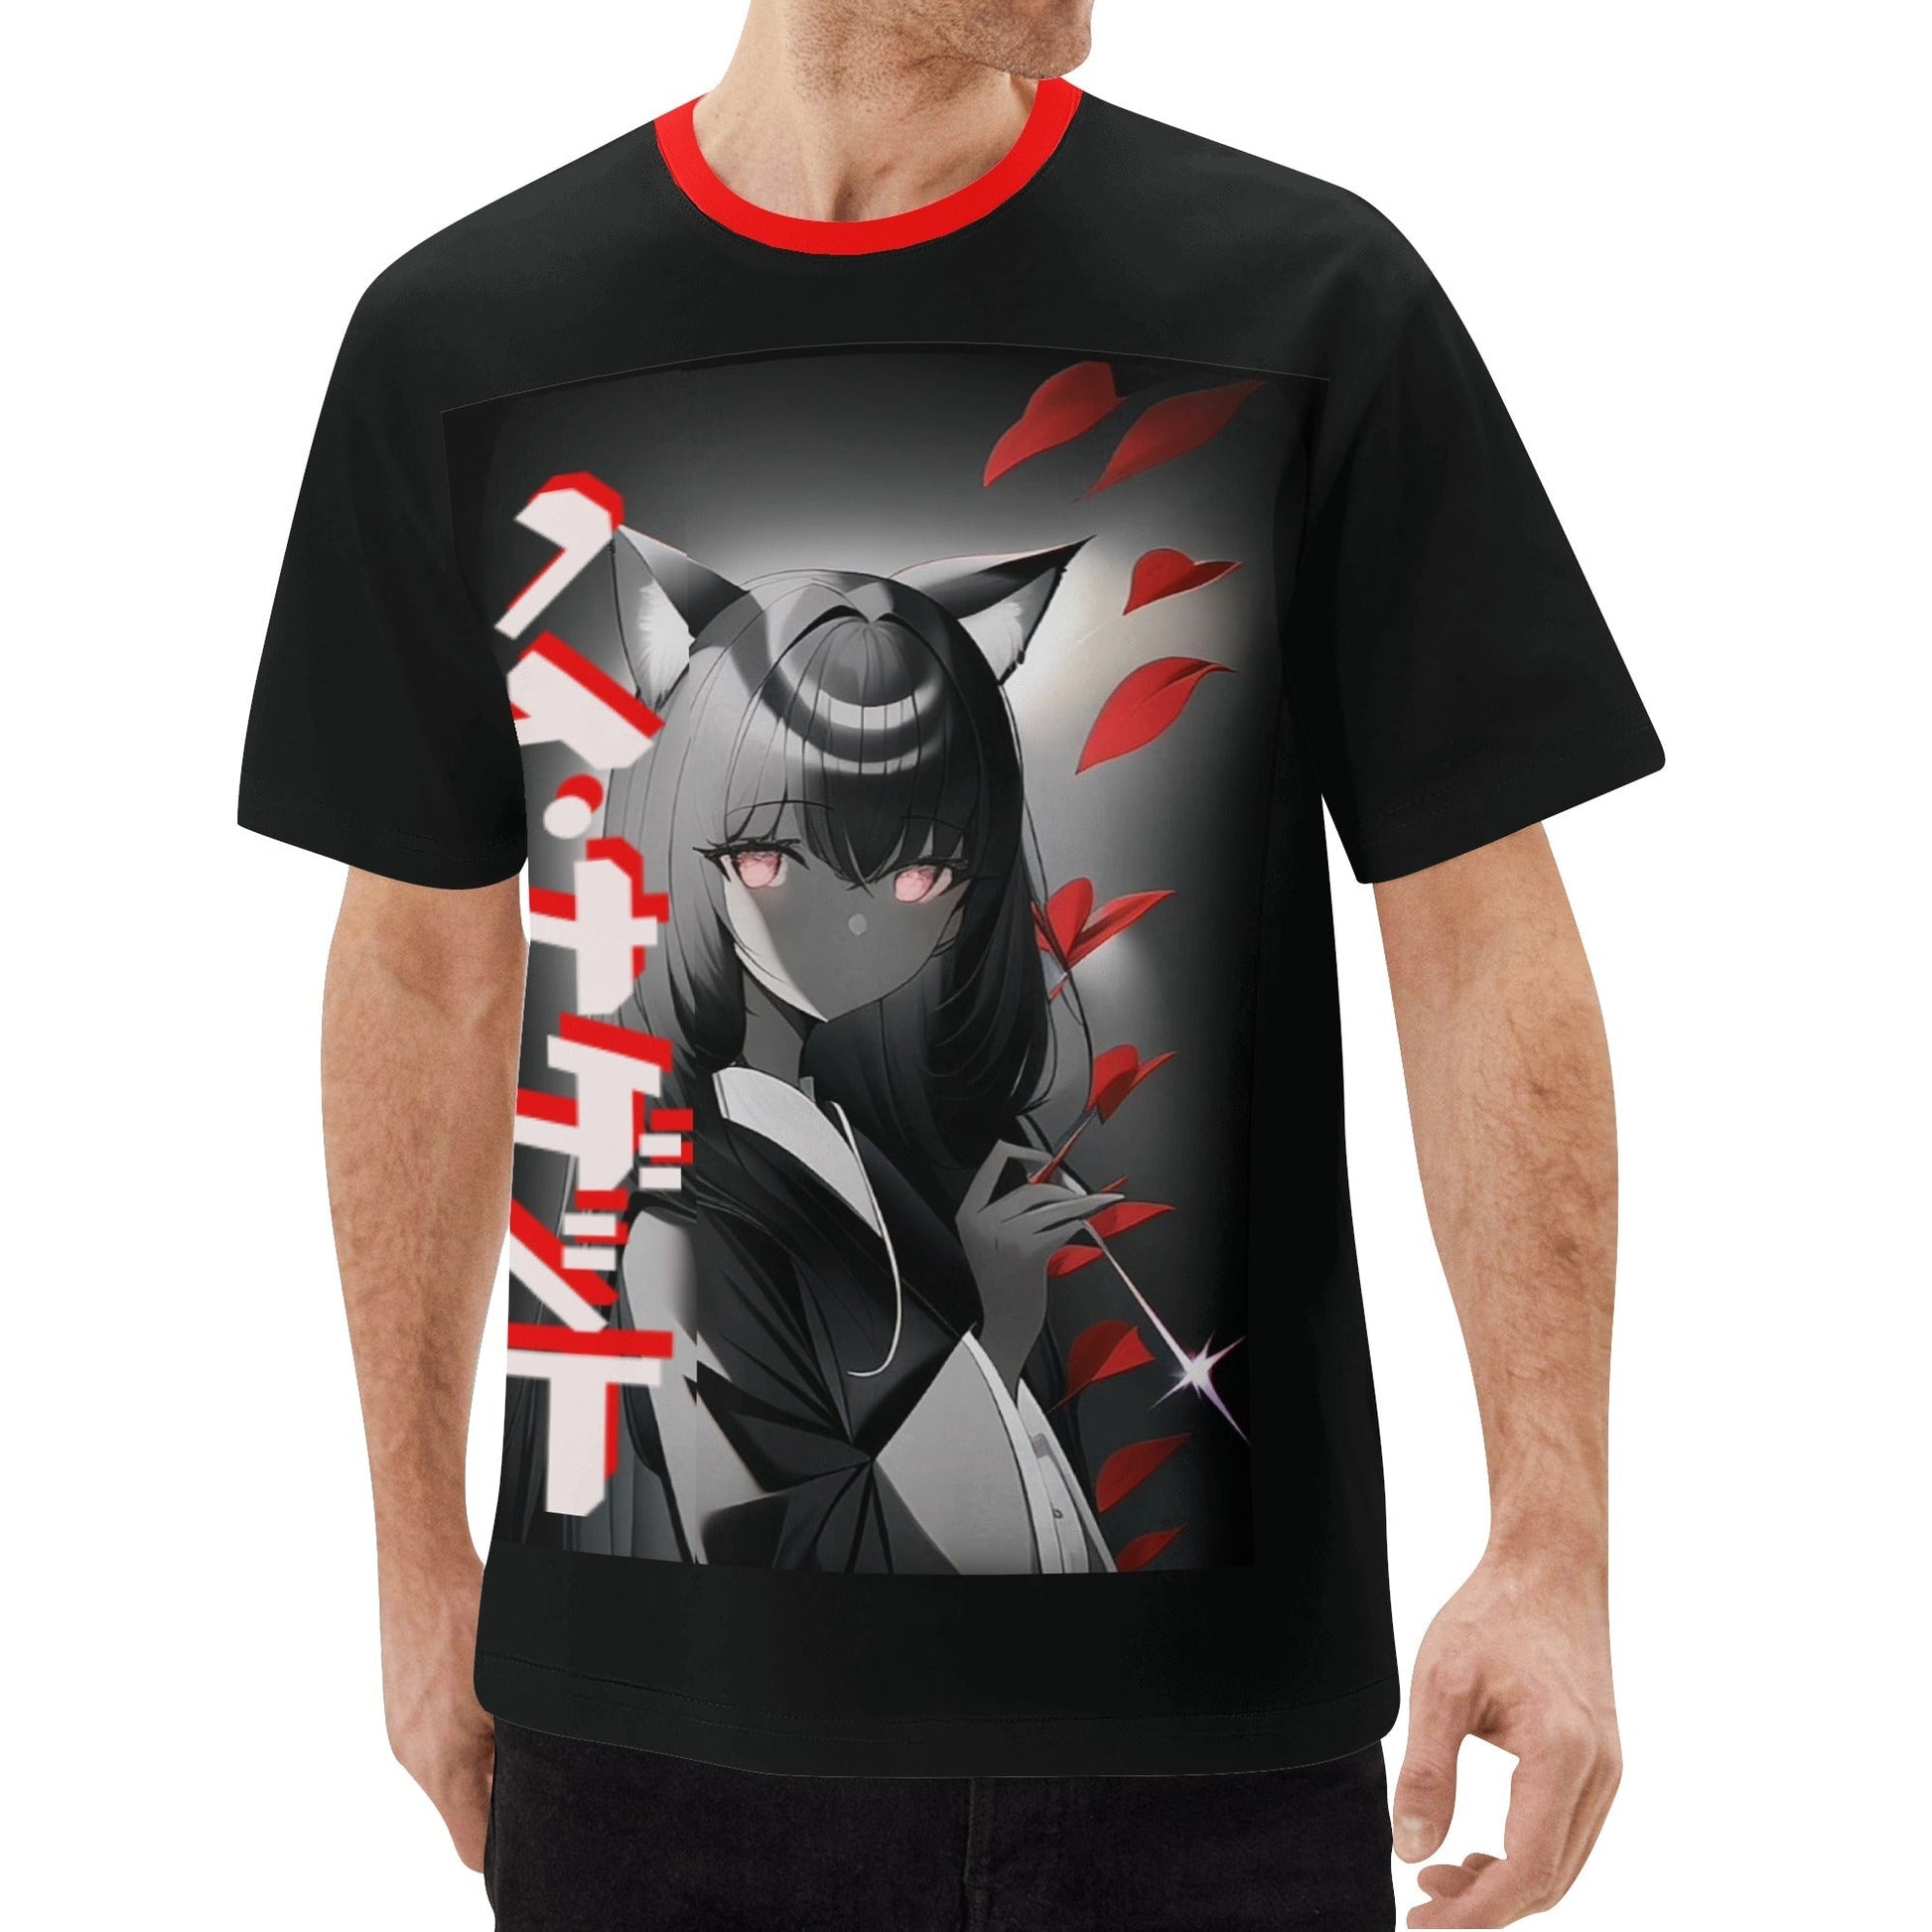 Stand out  with the  Tokyo Nugget Mens Sleeve T-Shirt  available at Hey Nugget. Grab yours today!